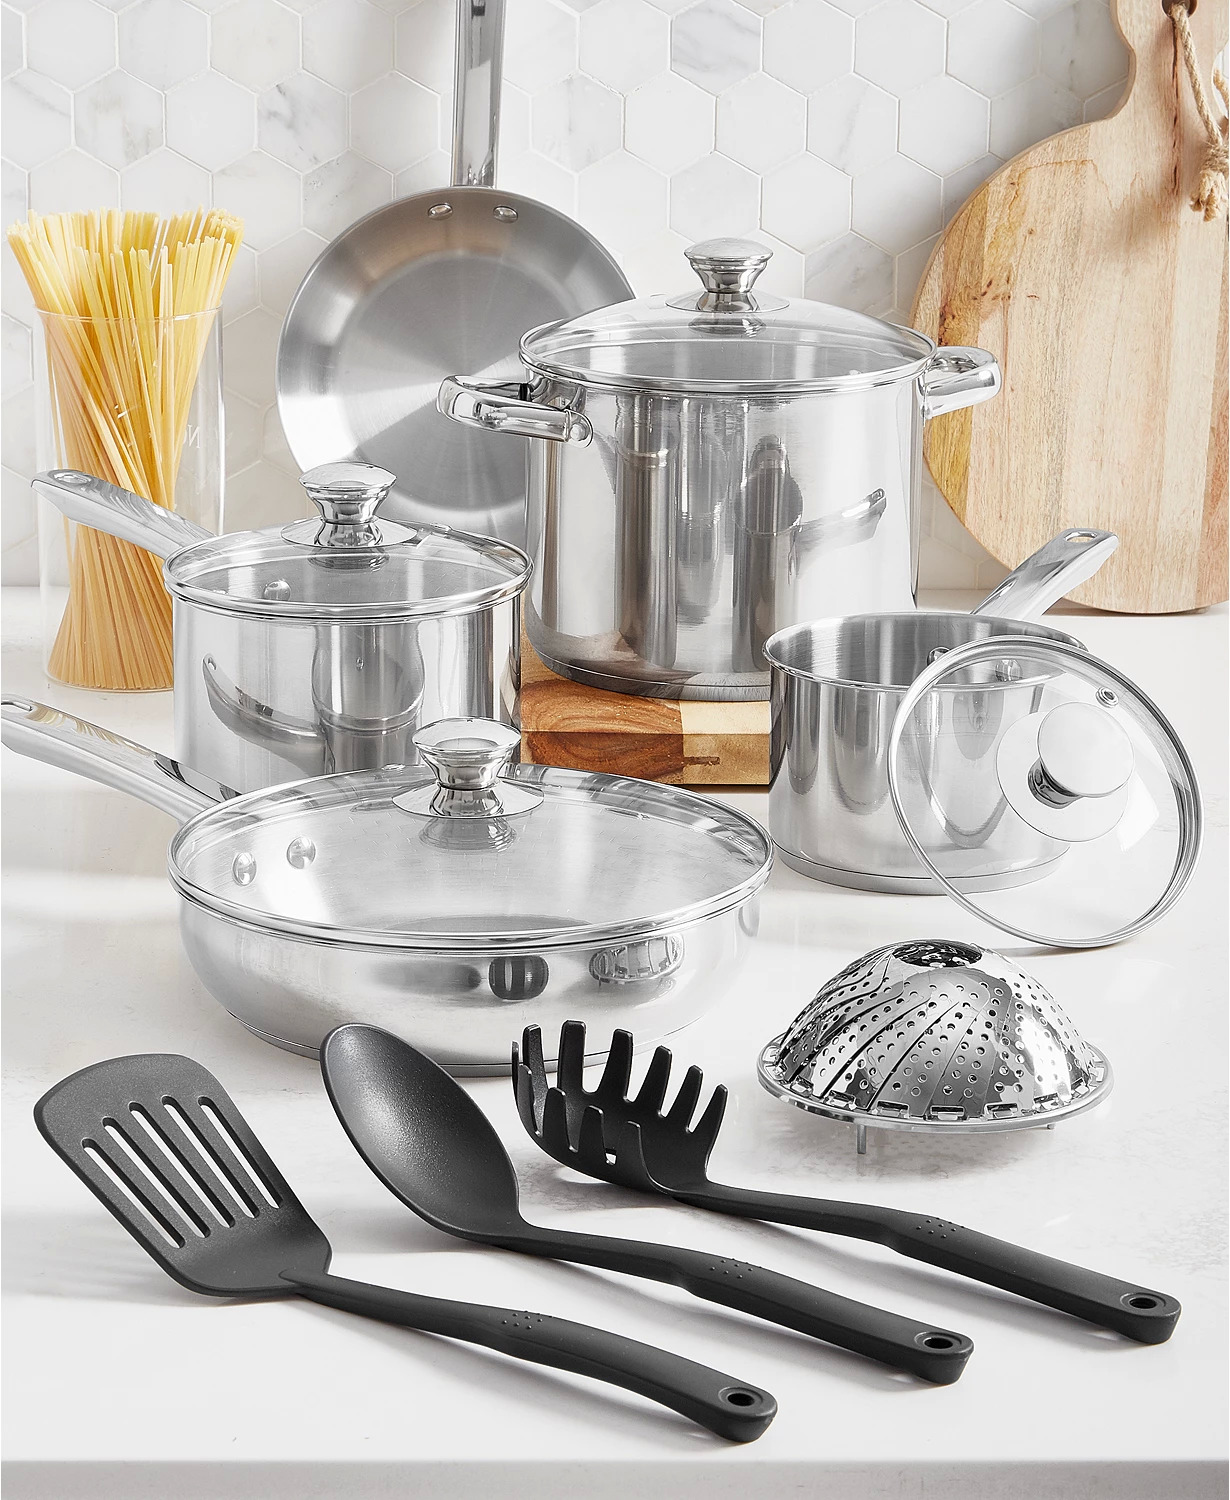 13-Piece Tools of the Trade Cookware Set (Stainless Steel or Non-Stick) $30 or less w/ SD Cashback + Free Shipping